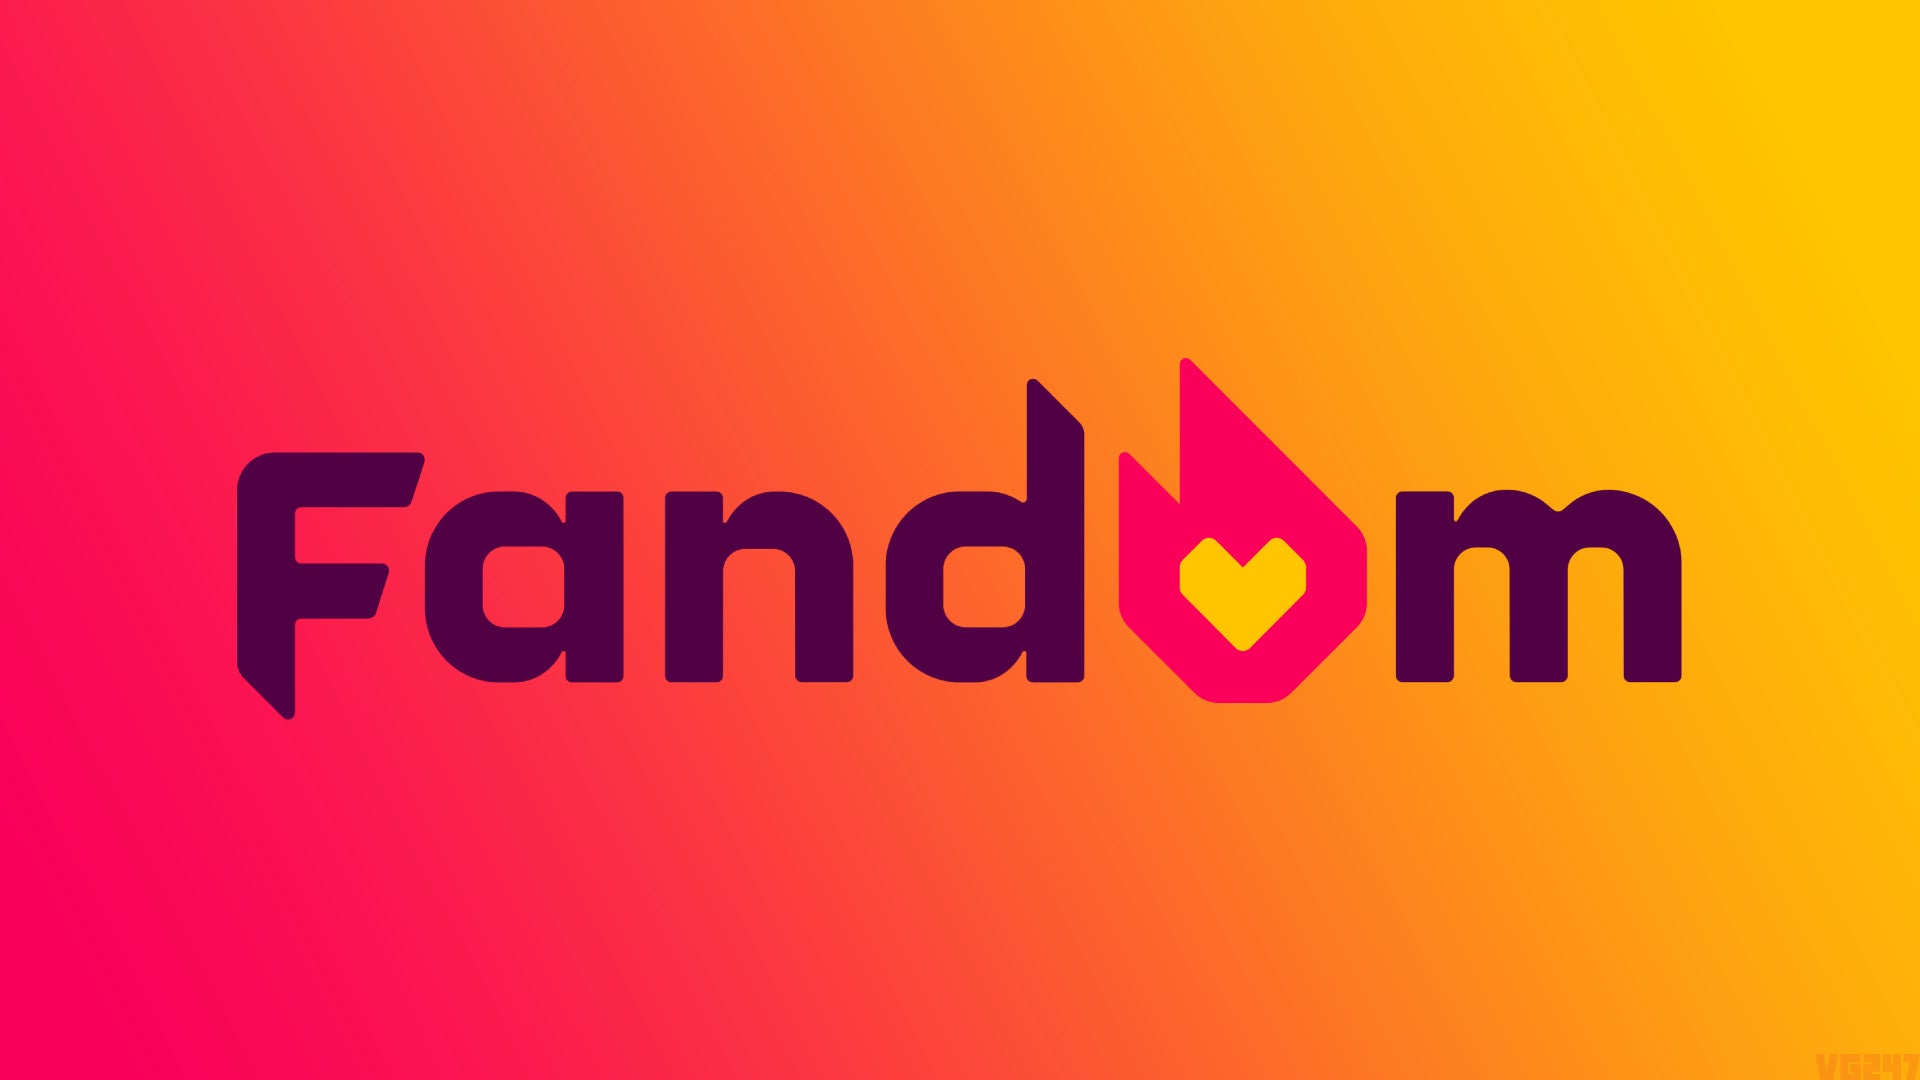 Giant Bomb, GameSpot, MetaCritic, GameFAQs and more have been acquired by Fandom